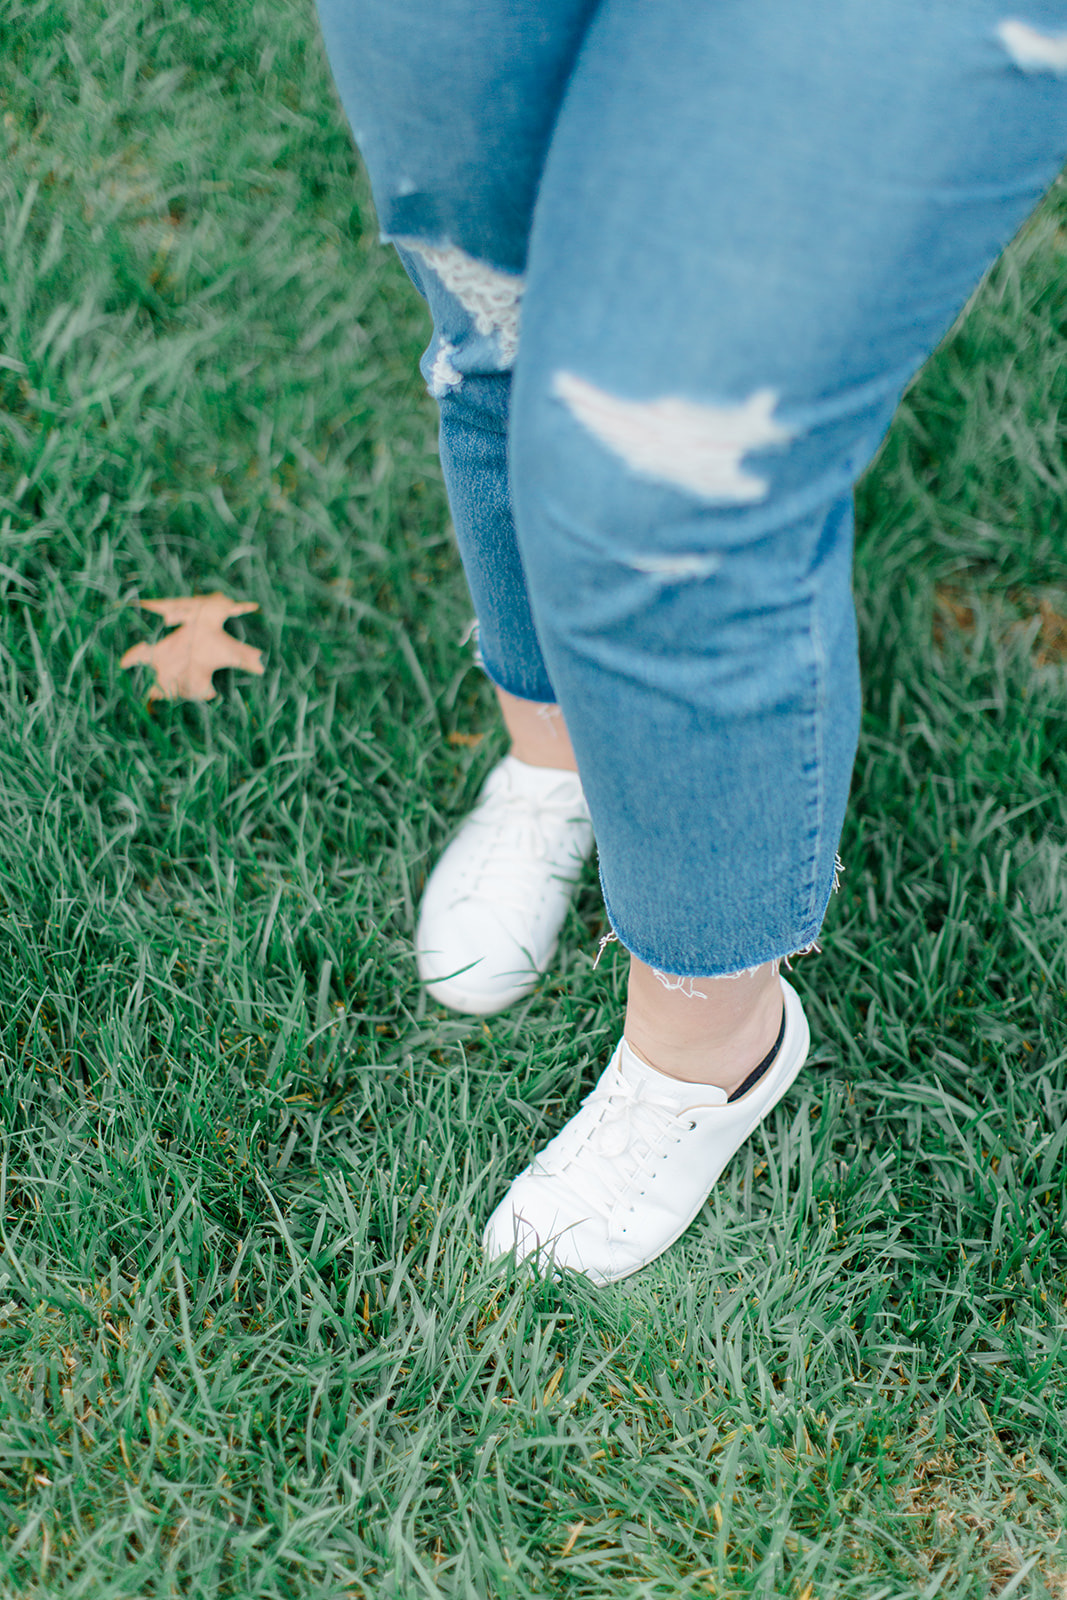 legs wearing tennis Shoes With Straight Leg Jeans in the grass